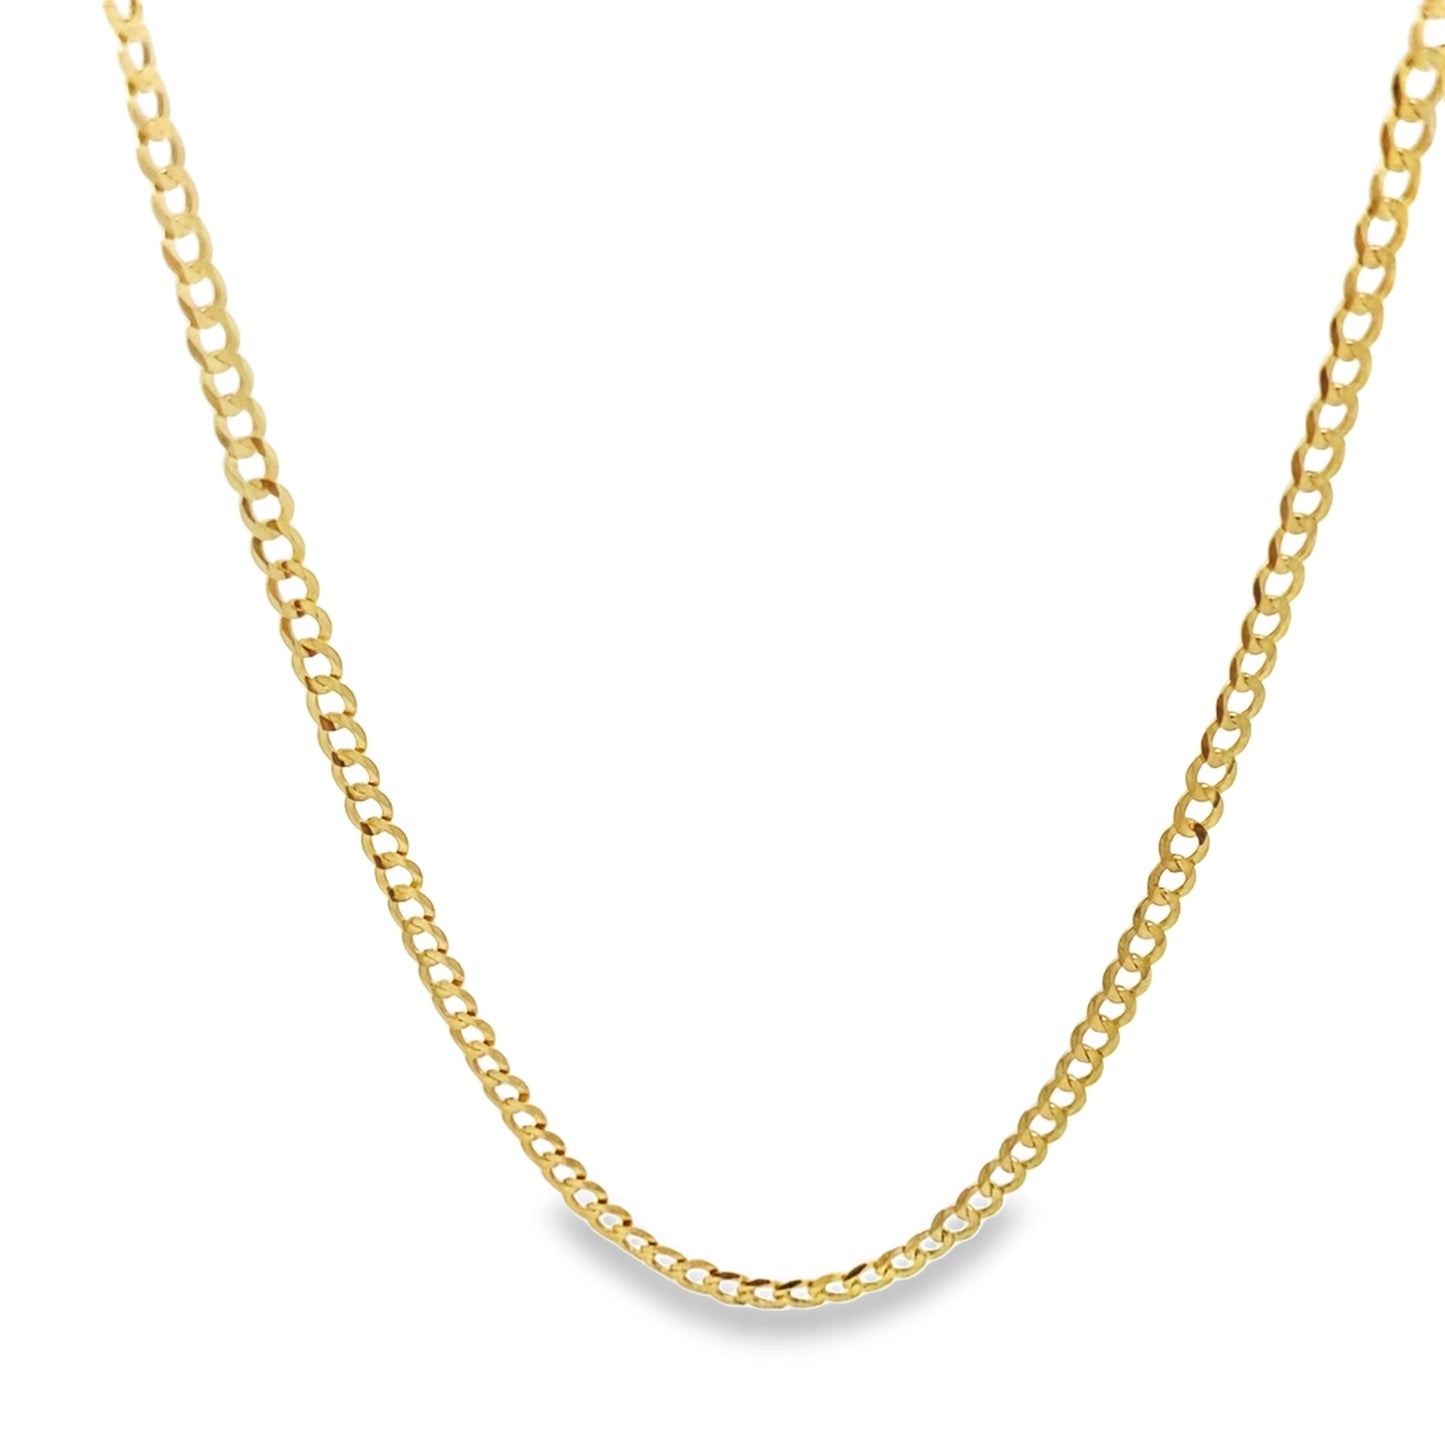 10K Yellow Gold Italian Curb Link Chain 3.5Mm 24.5In 6.2Dwt